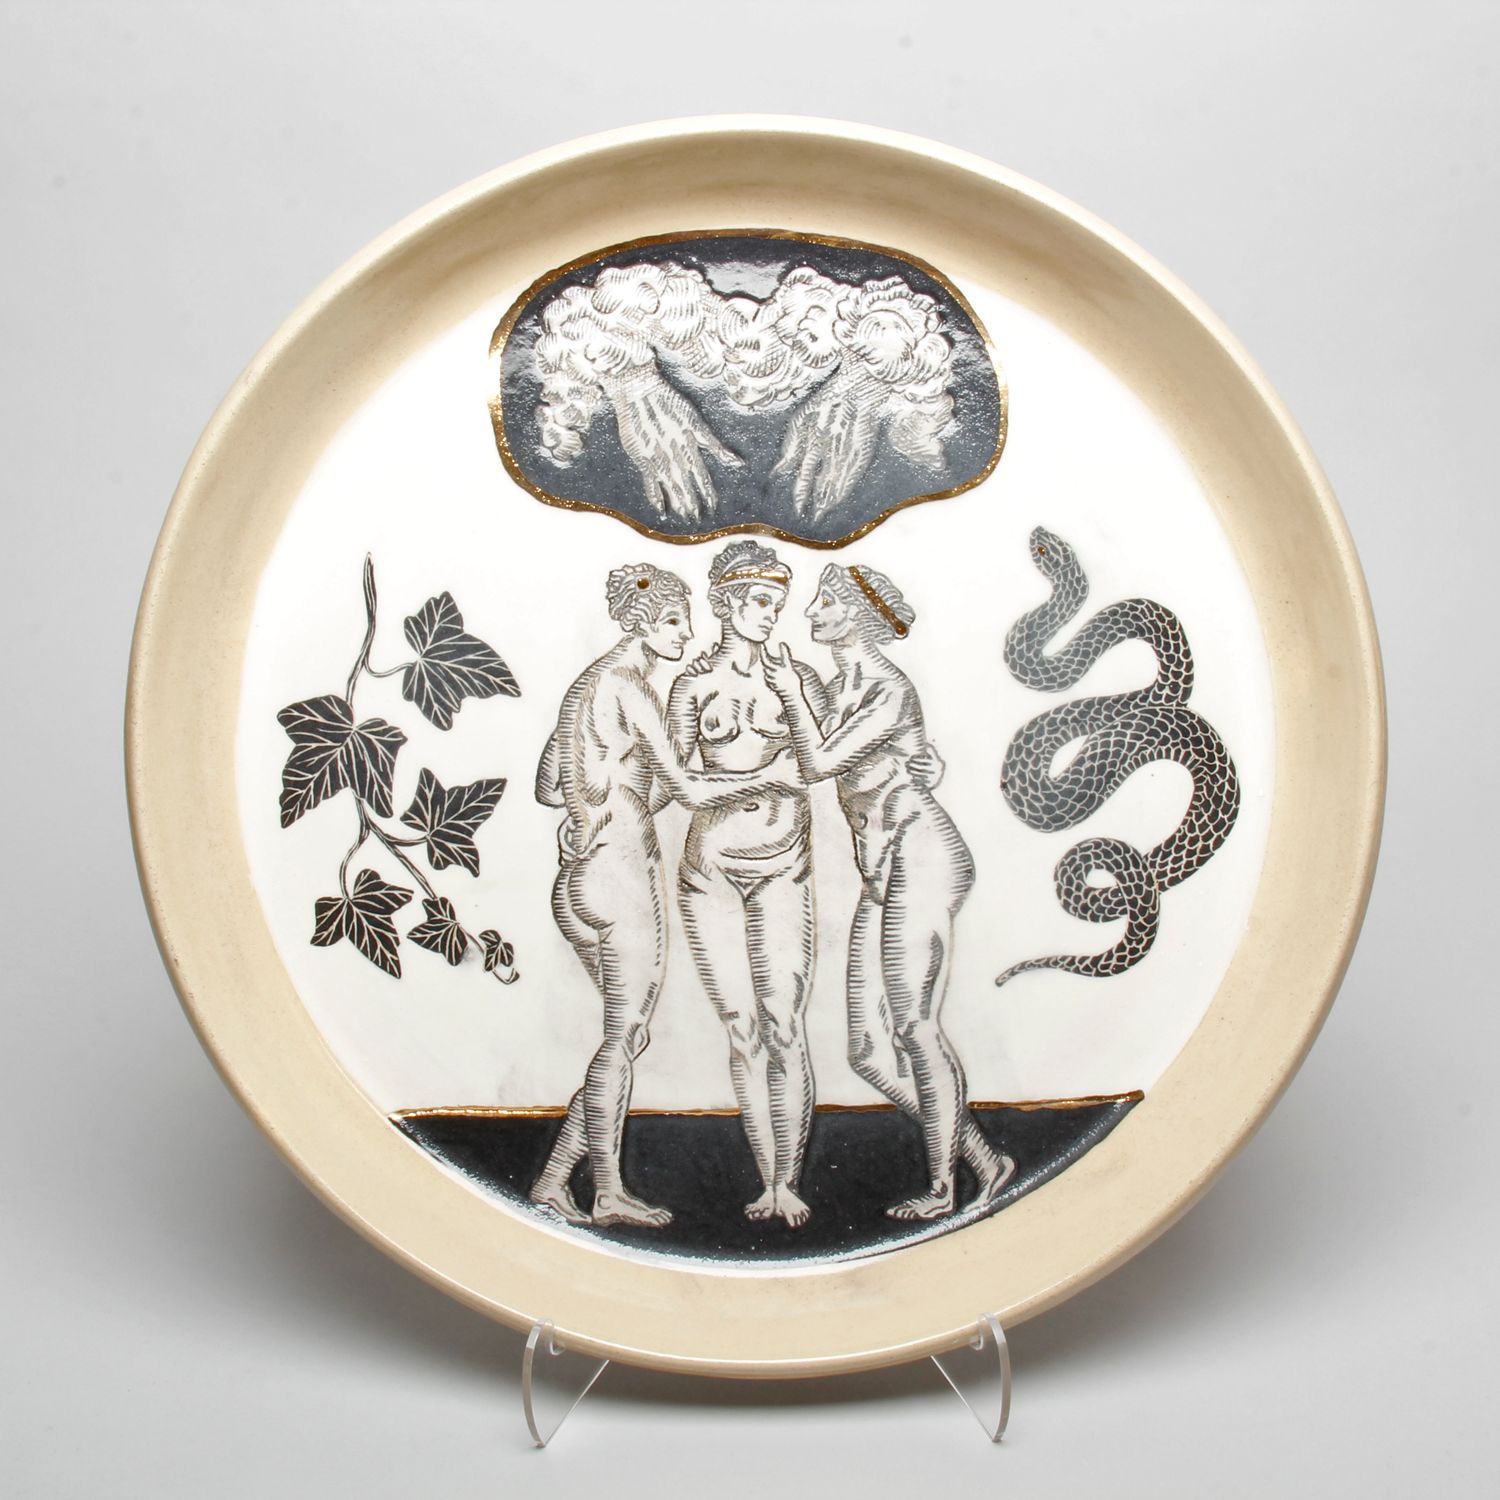 Emma Kip: Platter with Three Figures Product Image 1 of 3